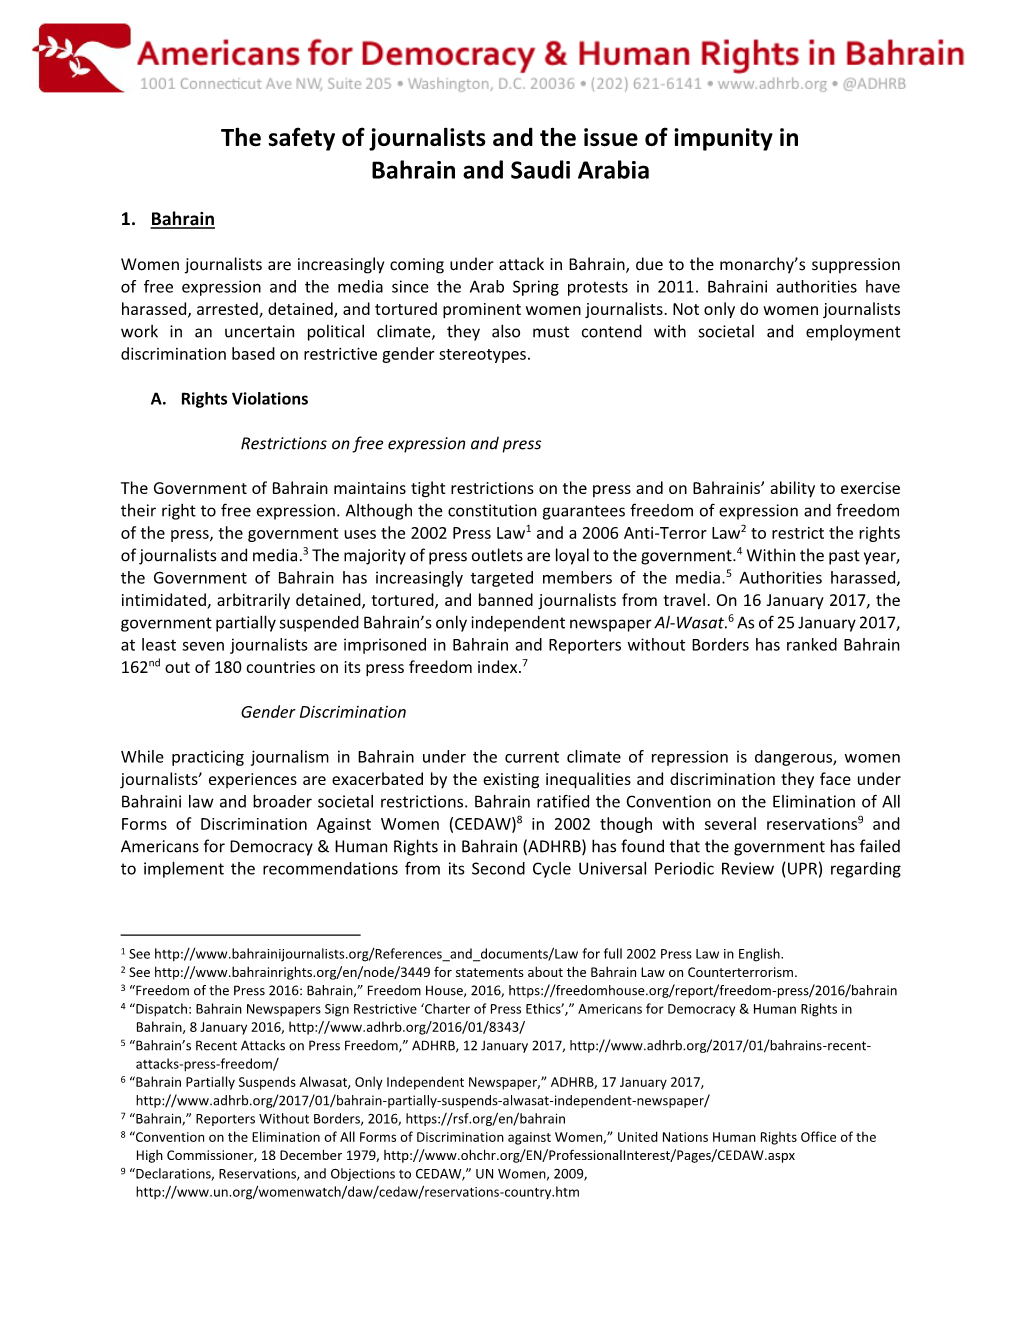 The Safety of Journalists and the Issue of Impunity in Bahrain and Saudi Arabia